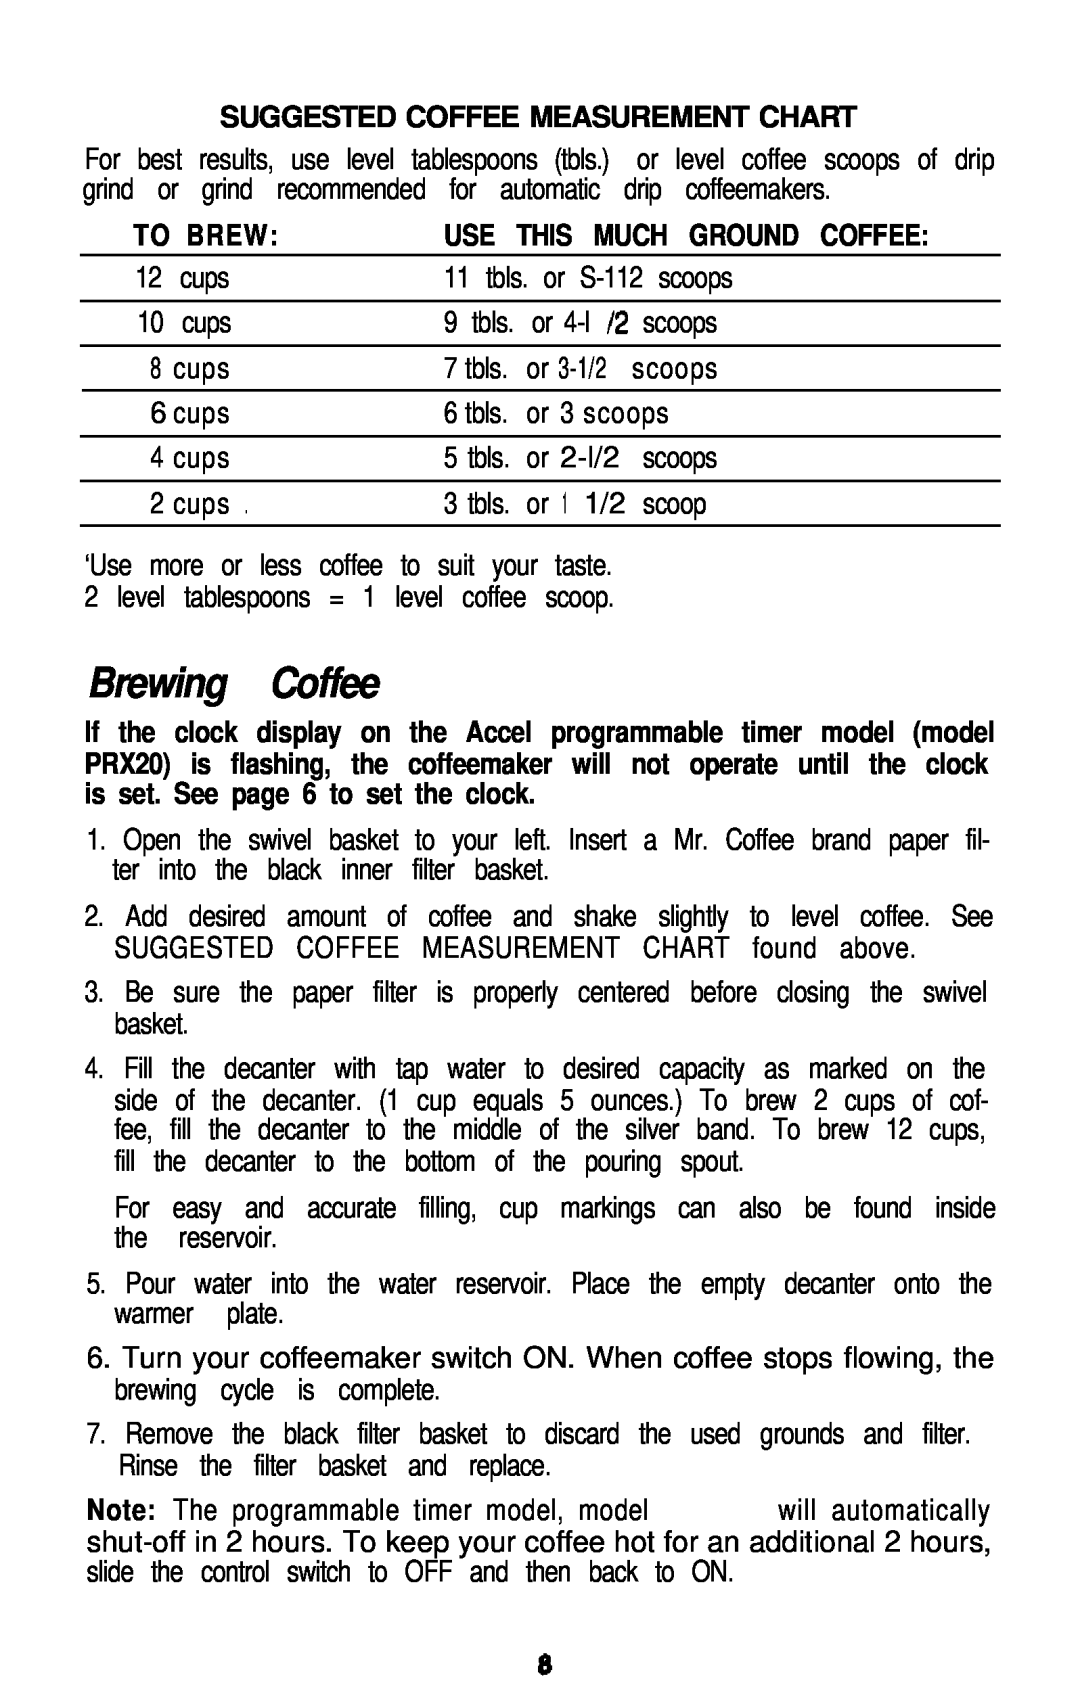 Mr. Coffee PR12A, PRX20 Brewing Coffee, Suggested Coffee Measurement Chart, To Brew, Use This Much Ground Coffee 